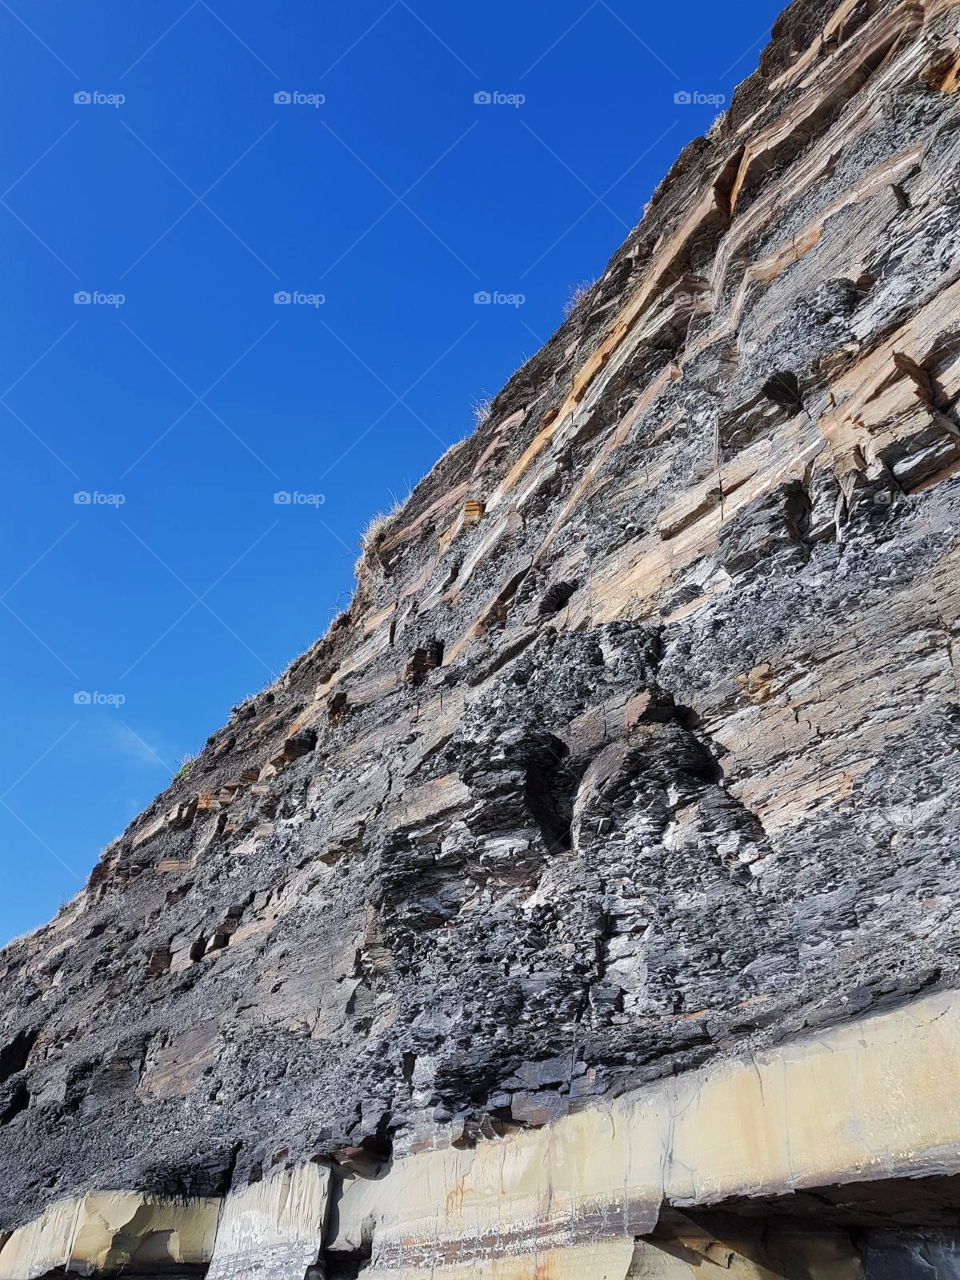 An English coastal cliff face with blue skies.